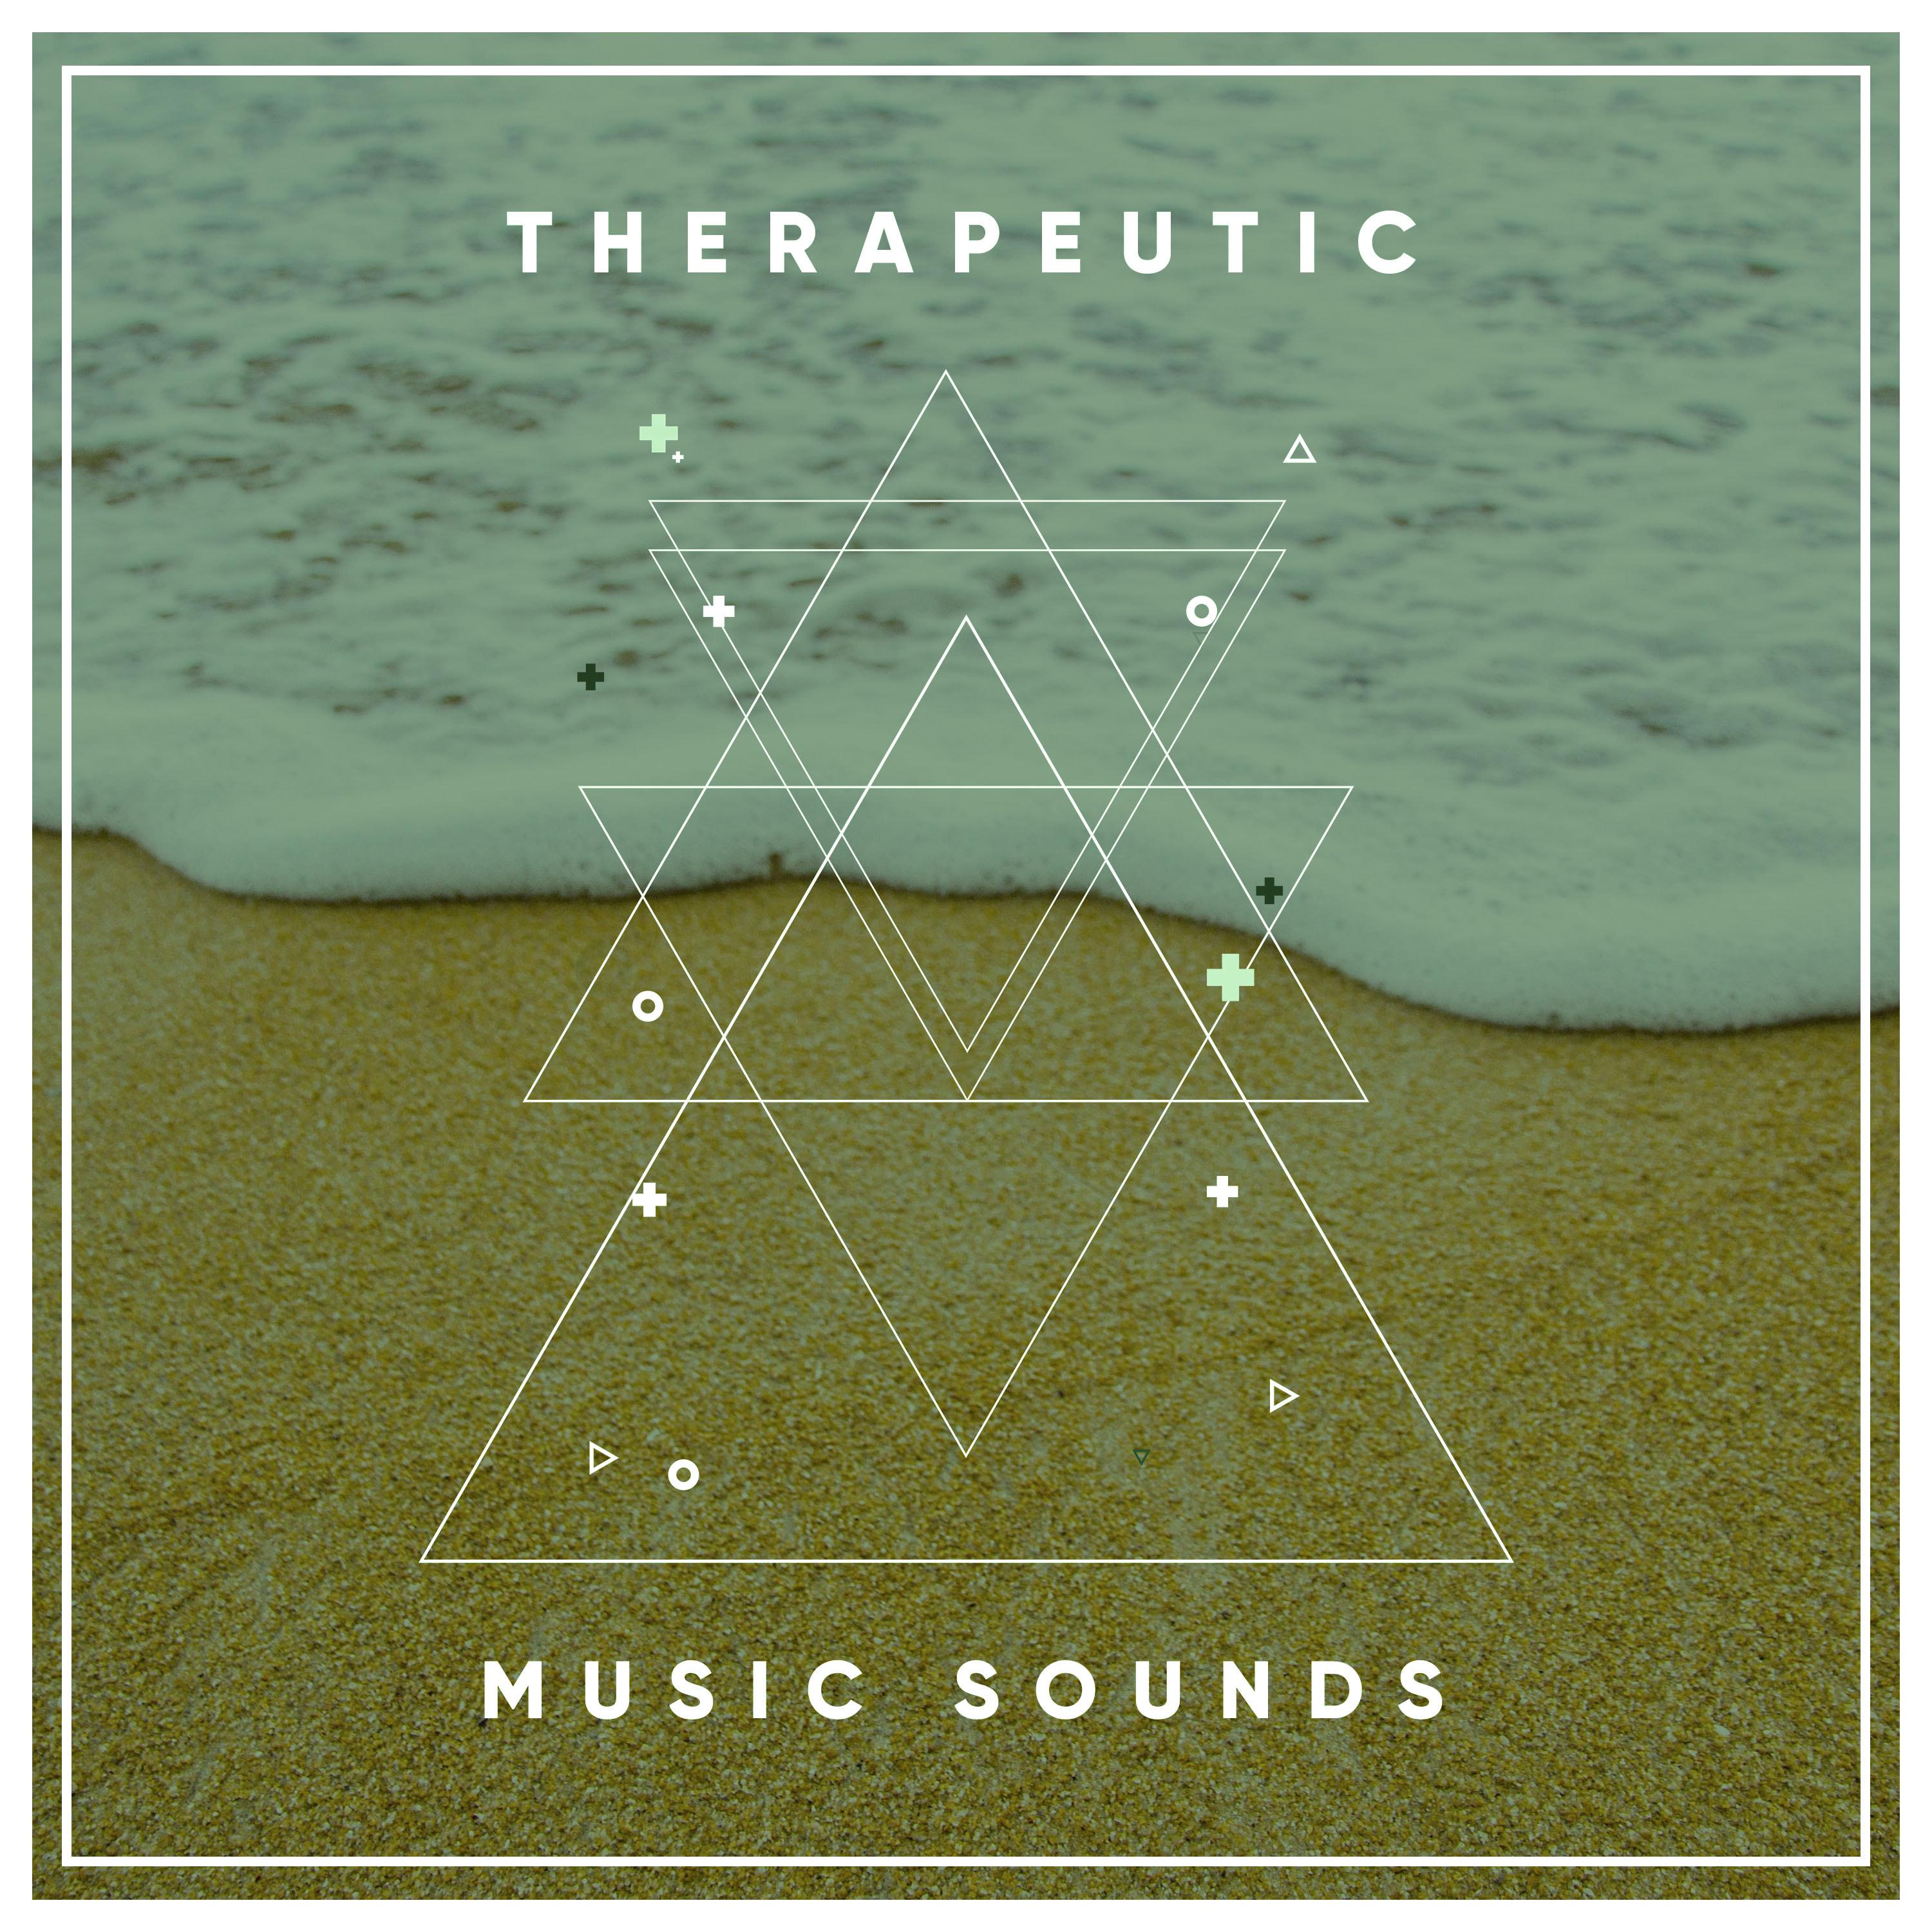 #2018 Therapeutic Music Sounds for Yoga, Zen and Meditation